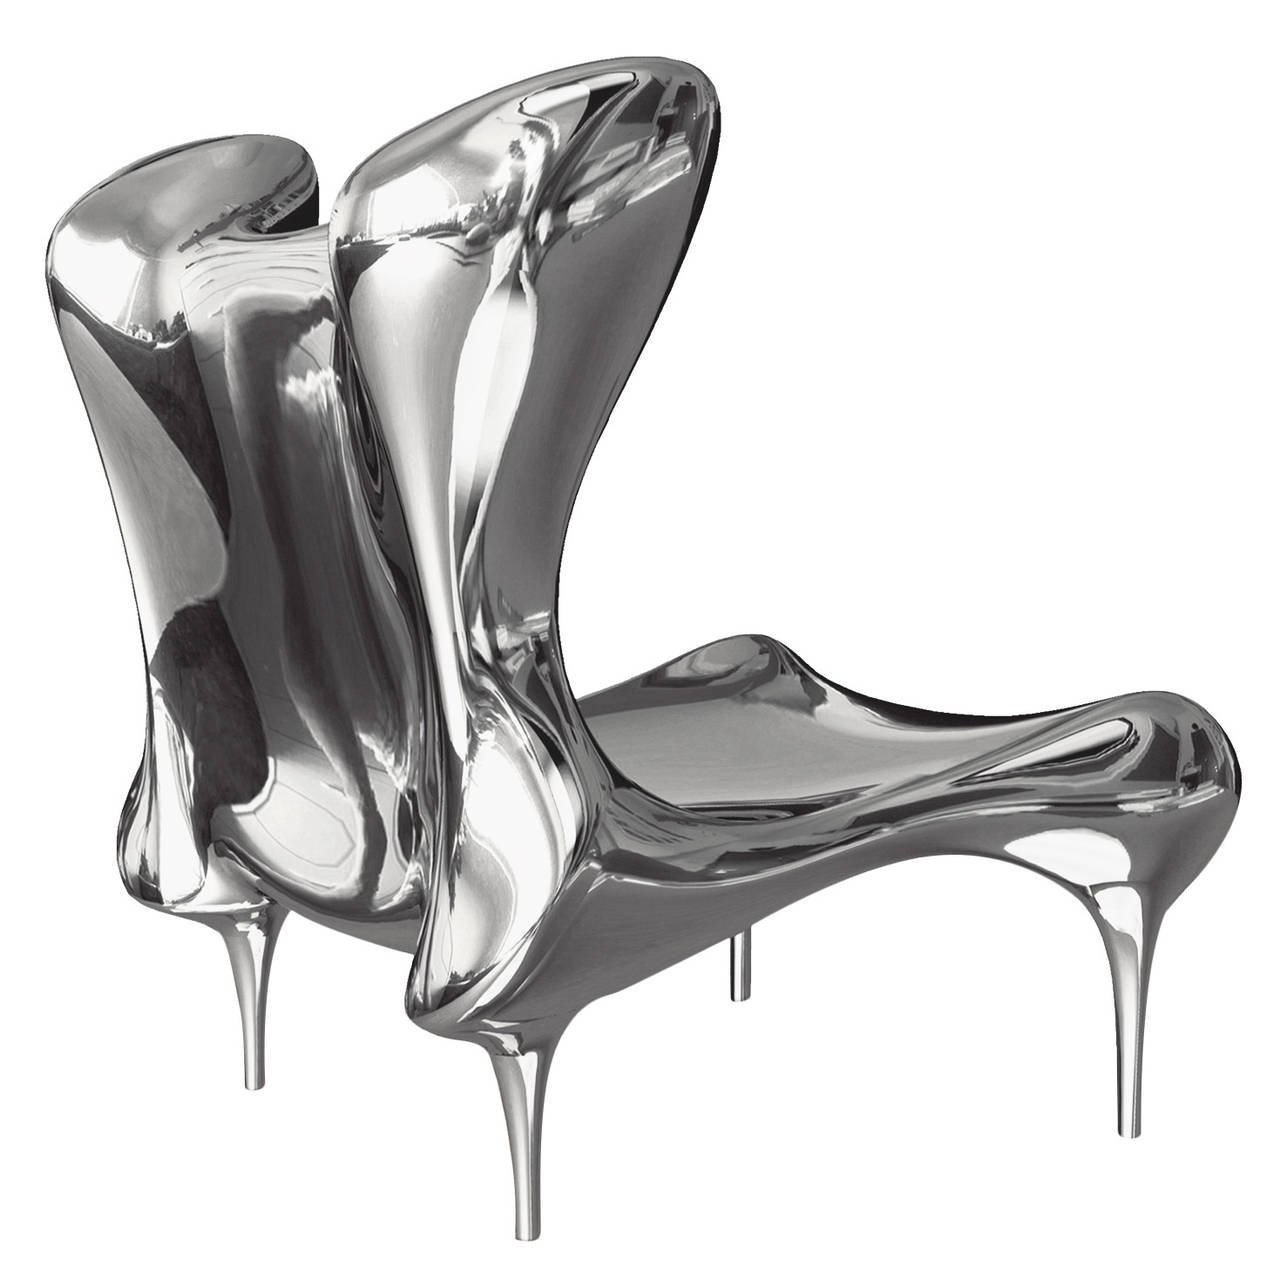 Riemann Chair in Mirror Polished Stainless Steel